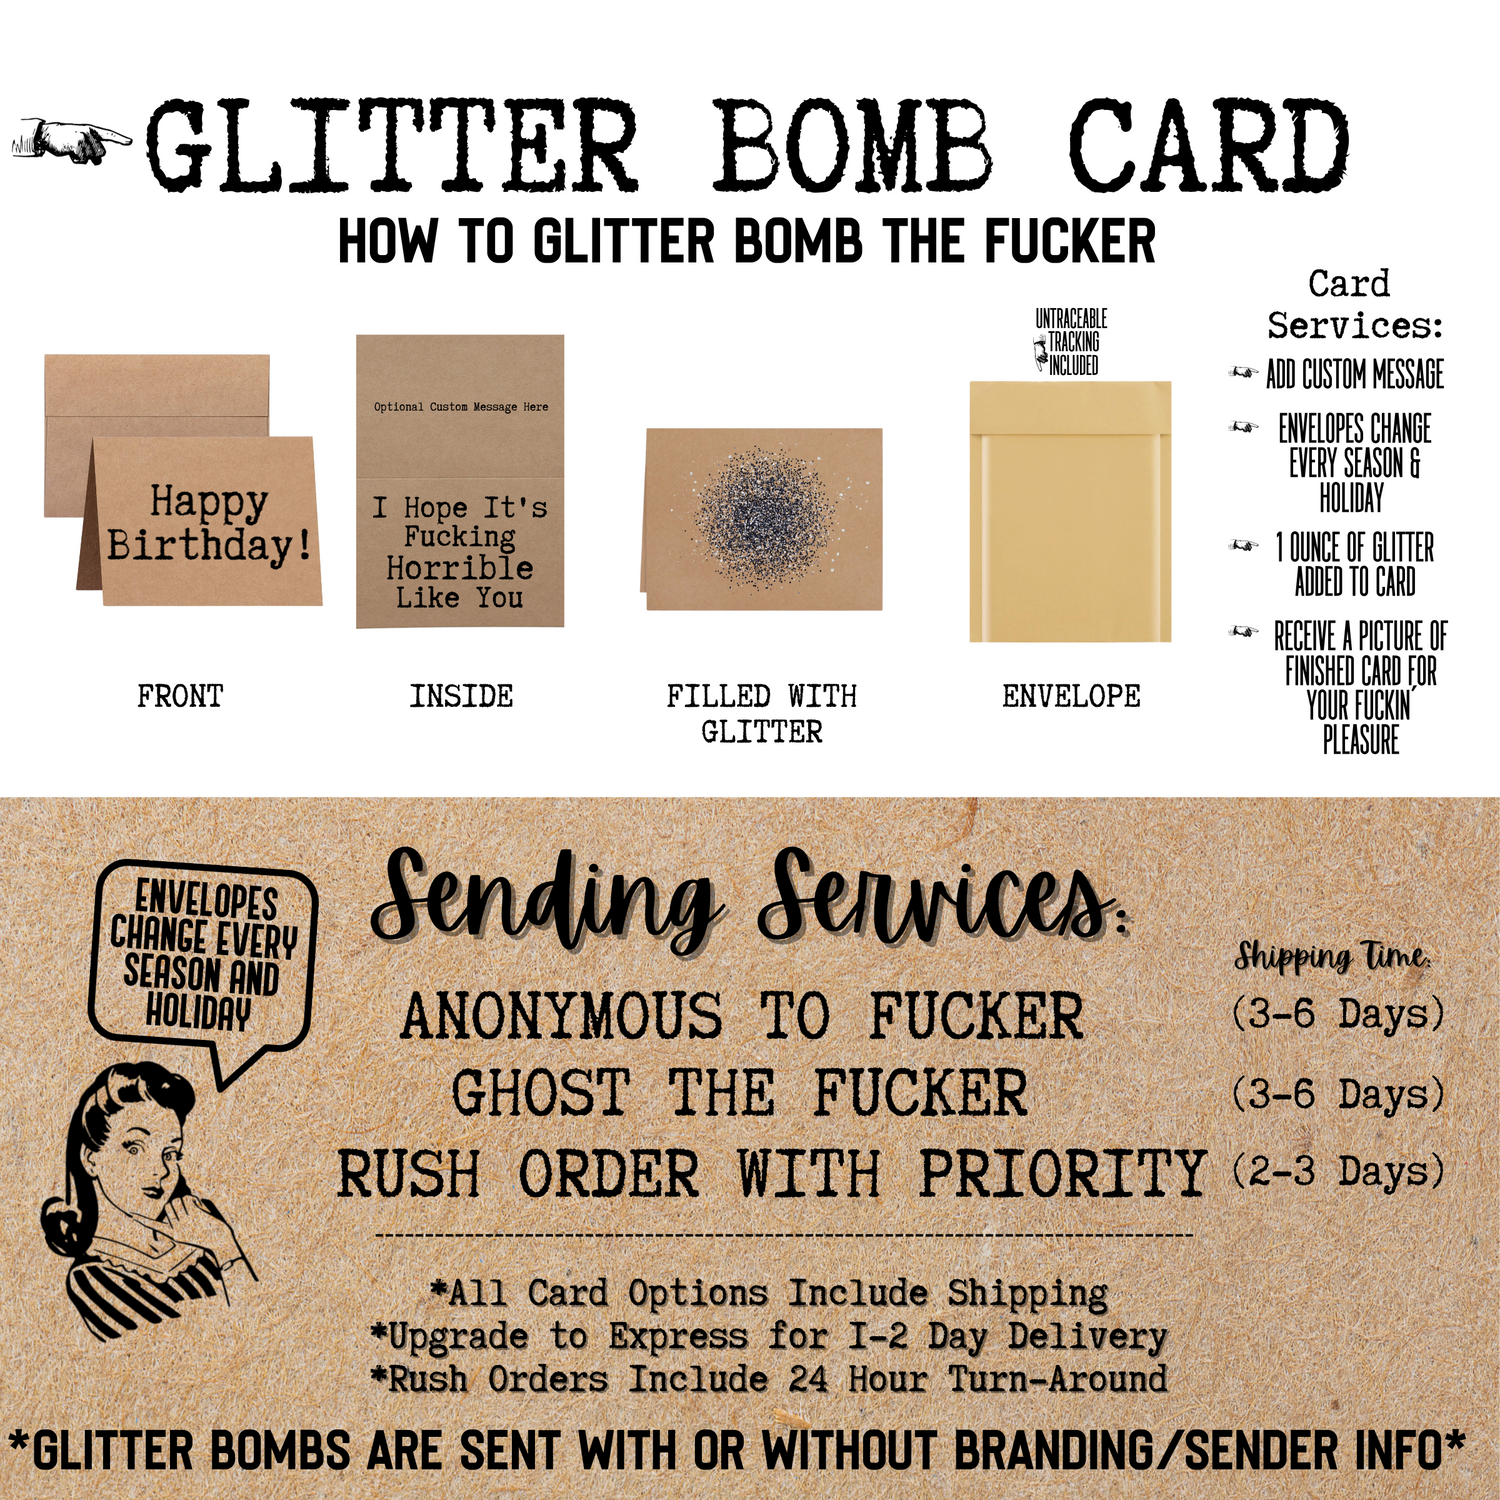 Glitter Bomb the Fucker with a bubble mailer filled with Glitter and topped with a Greeting Card - can be sent with or without branding